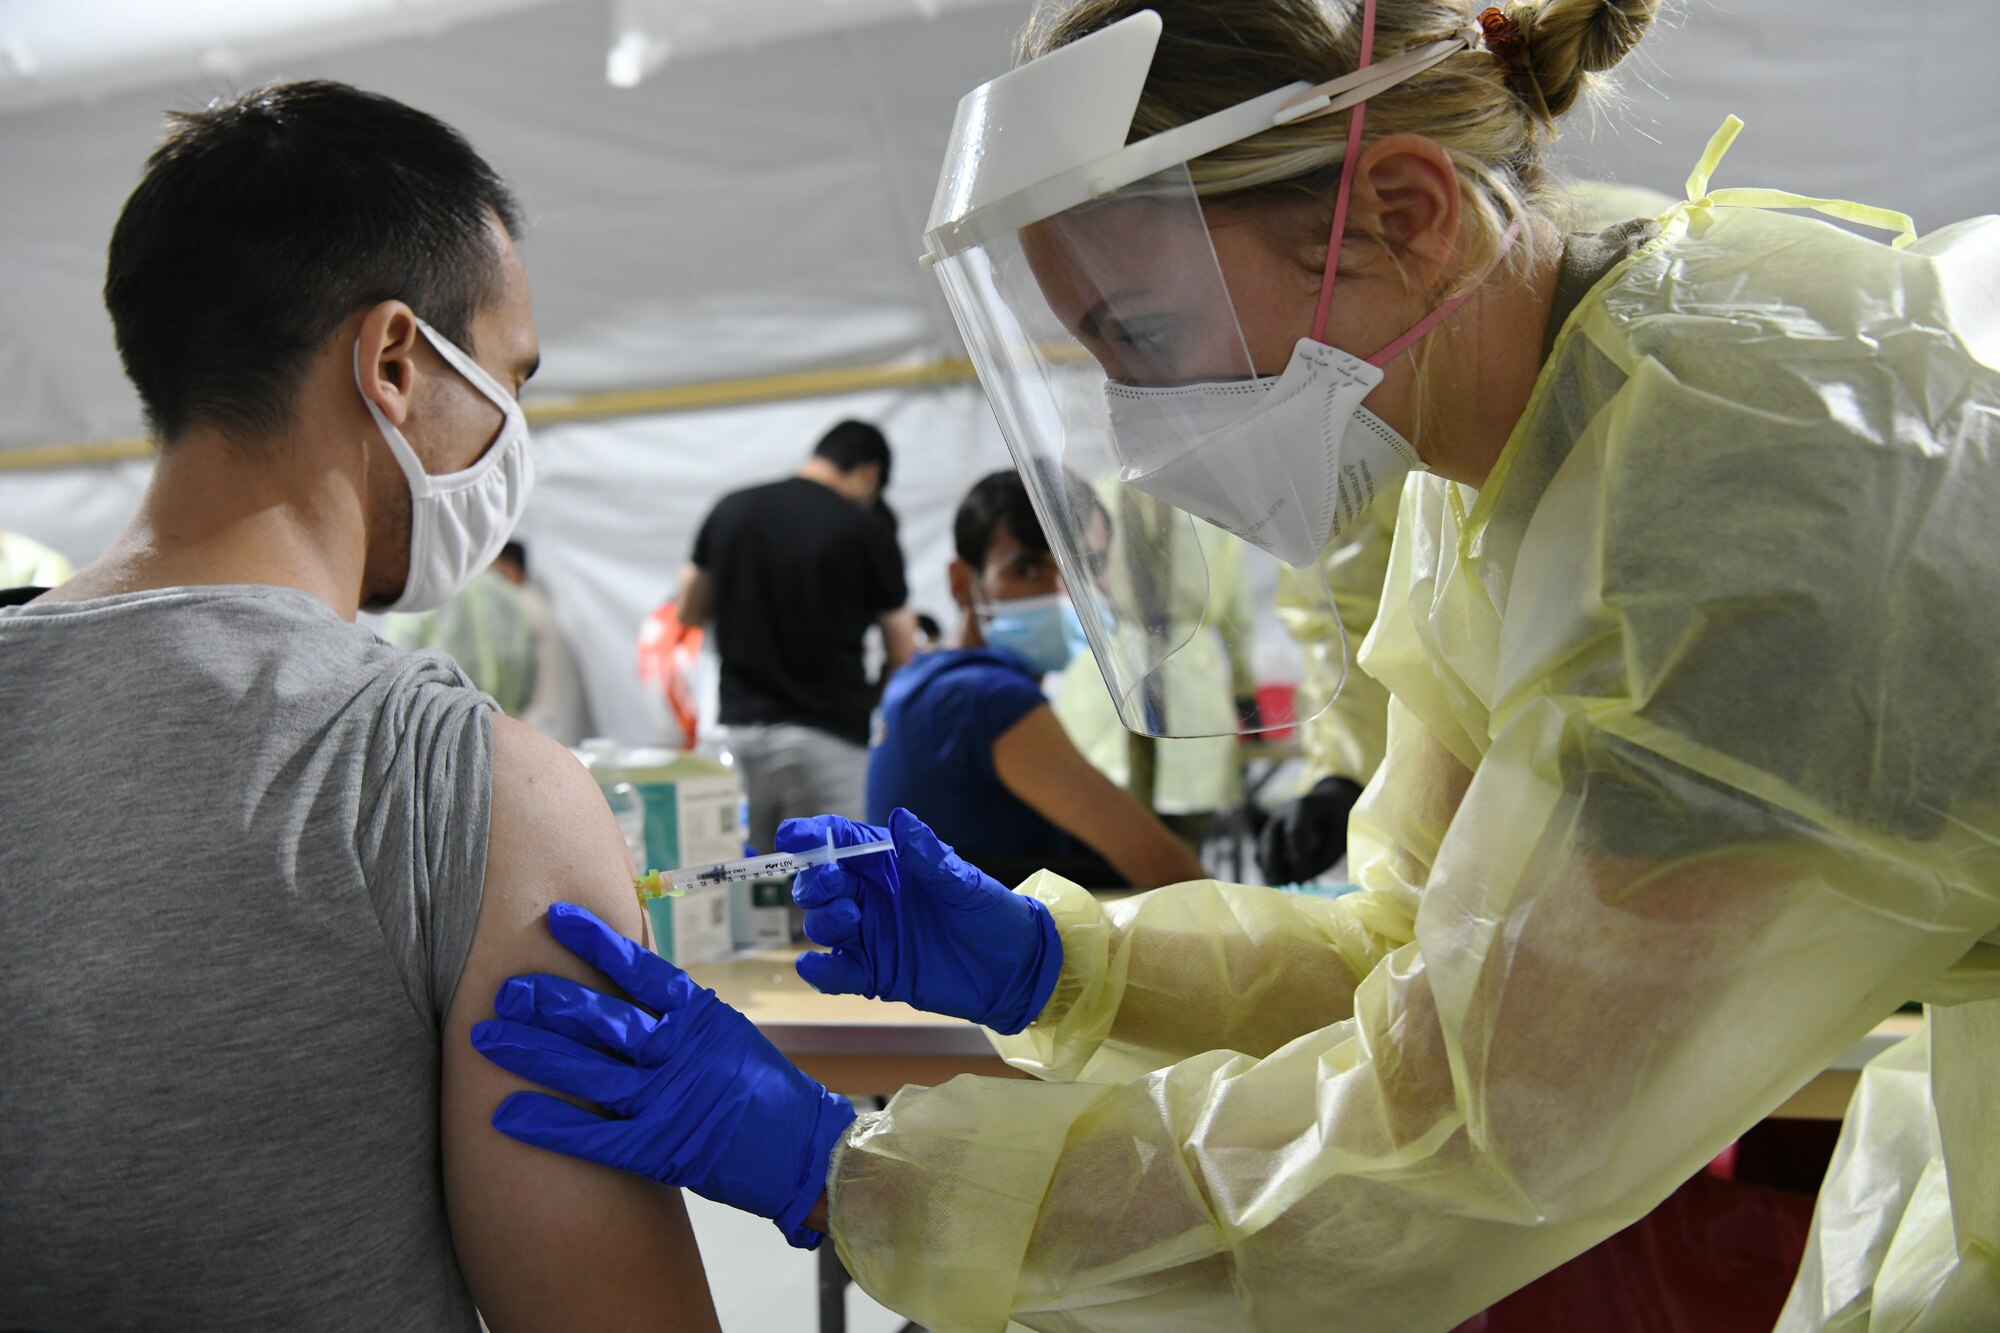 Image of an Airman providing a vaccine.